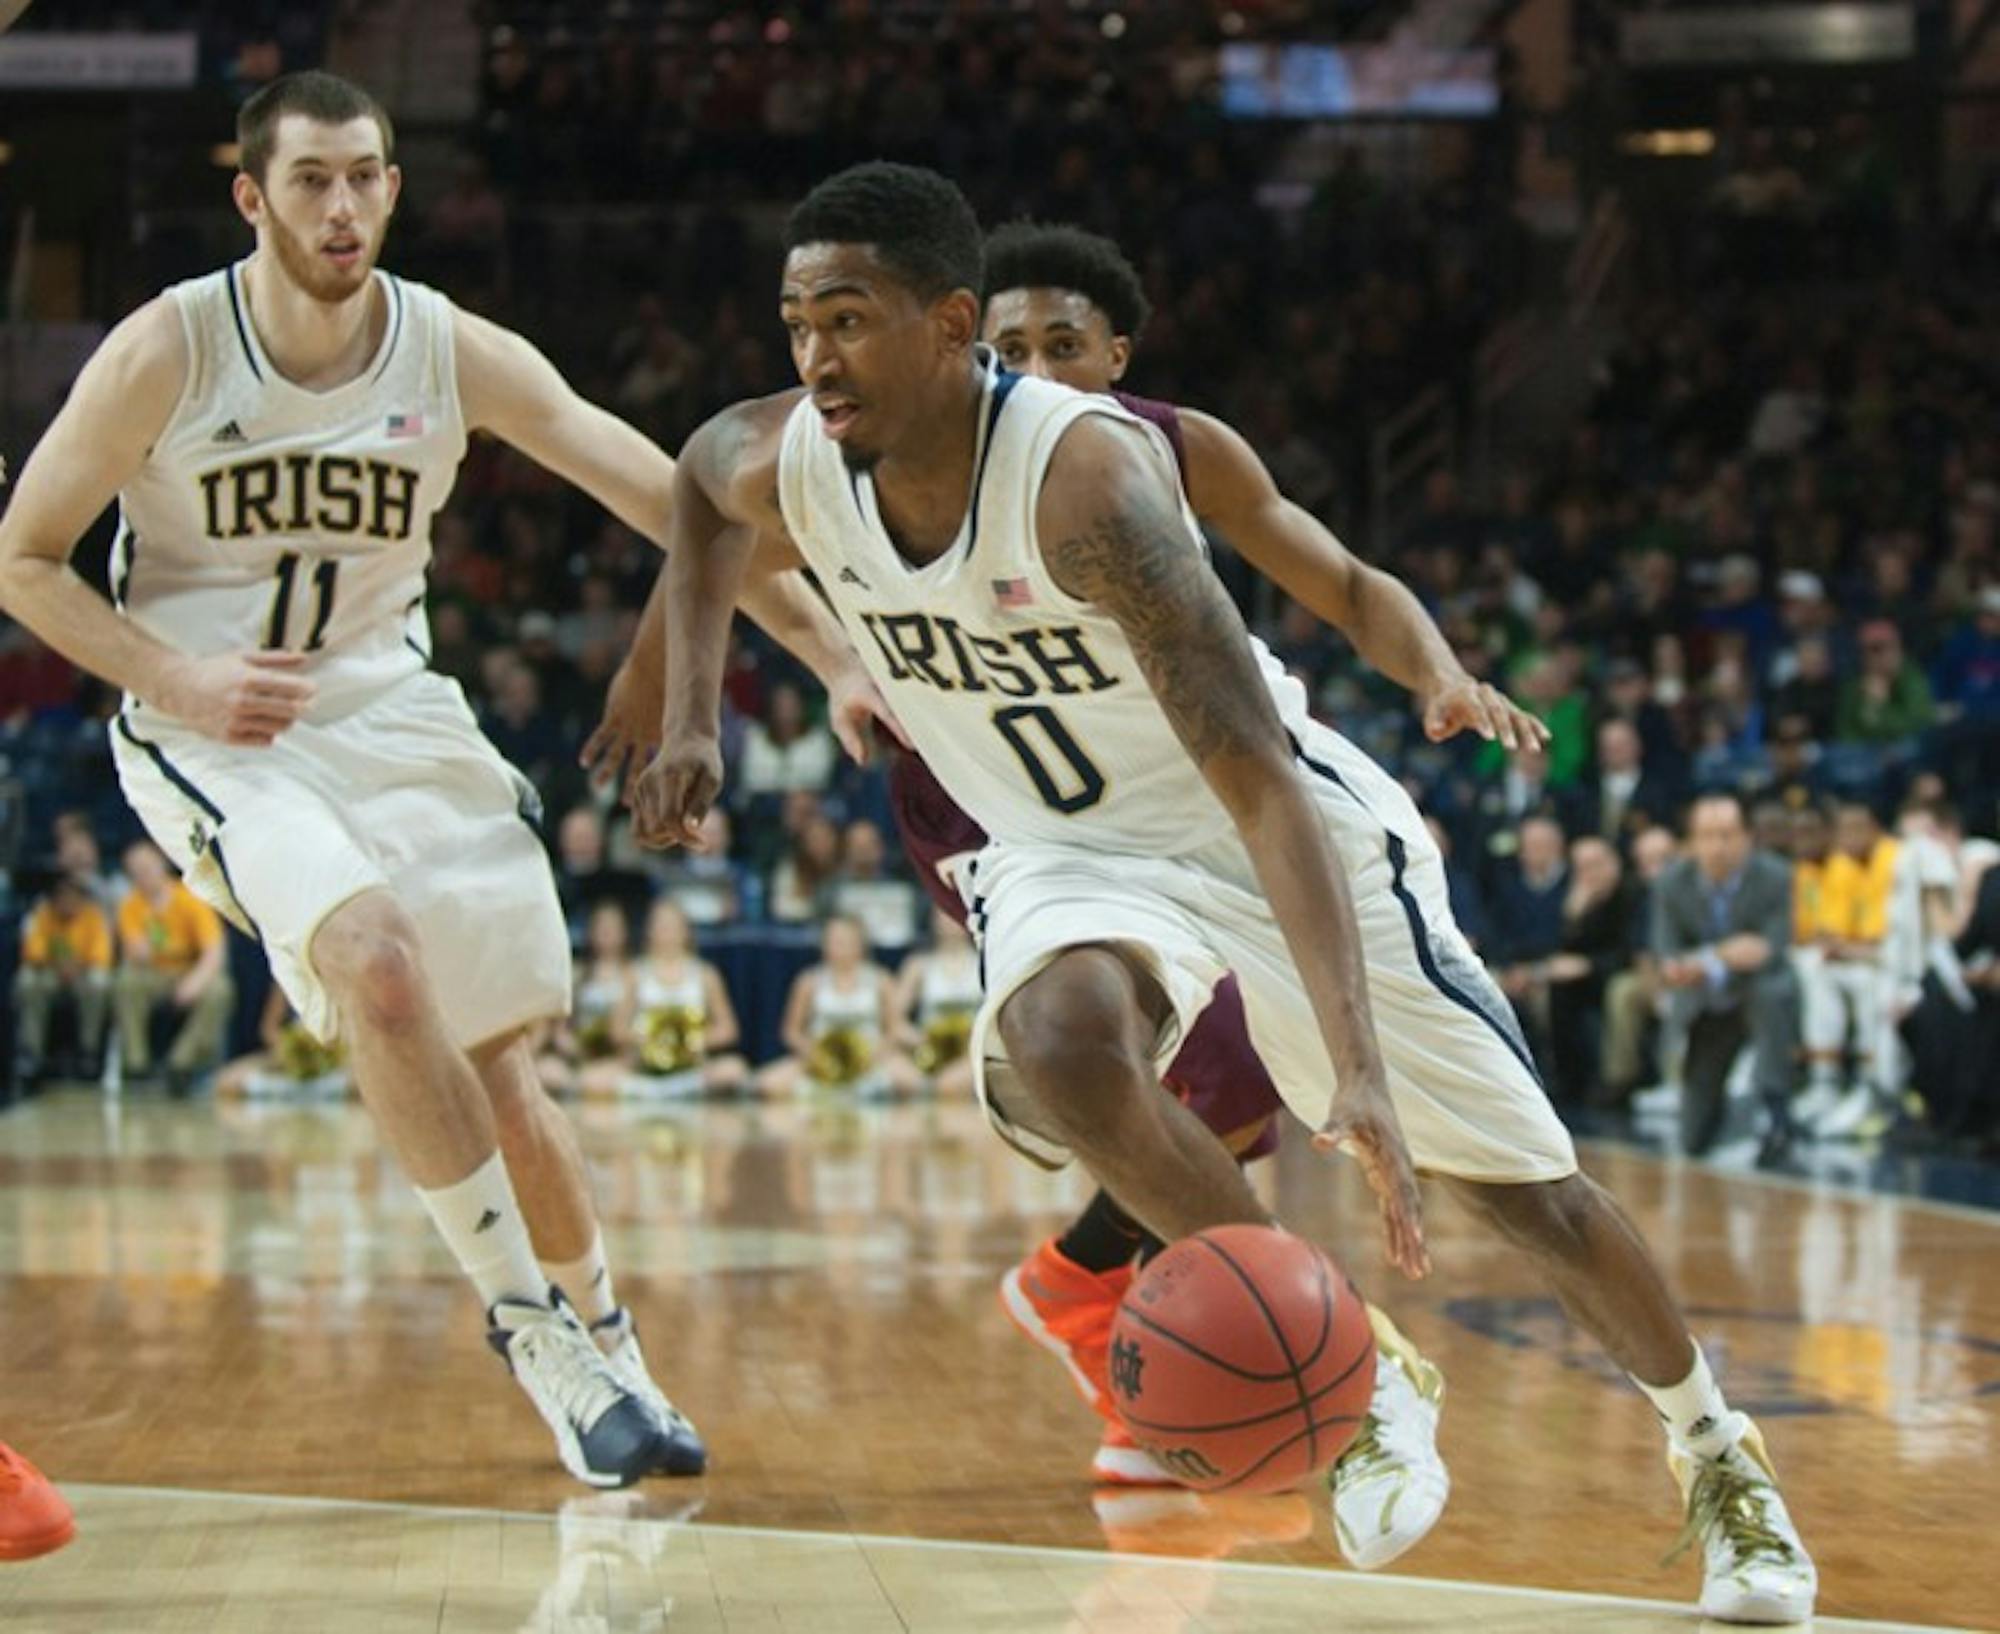 Irish senior guard Eric Atkins drives during Notre Dame’s 70-63 win over Virginia Tech on Jan. 19, the team’s only win in its last six games.